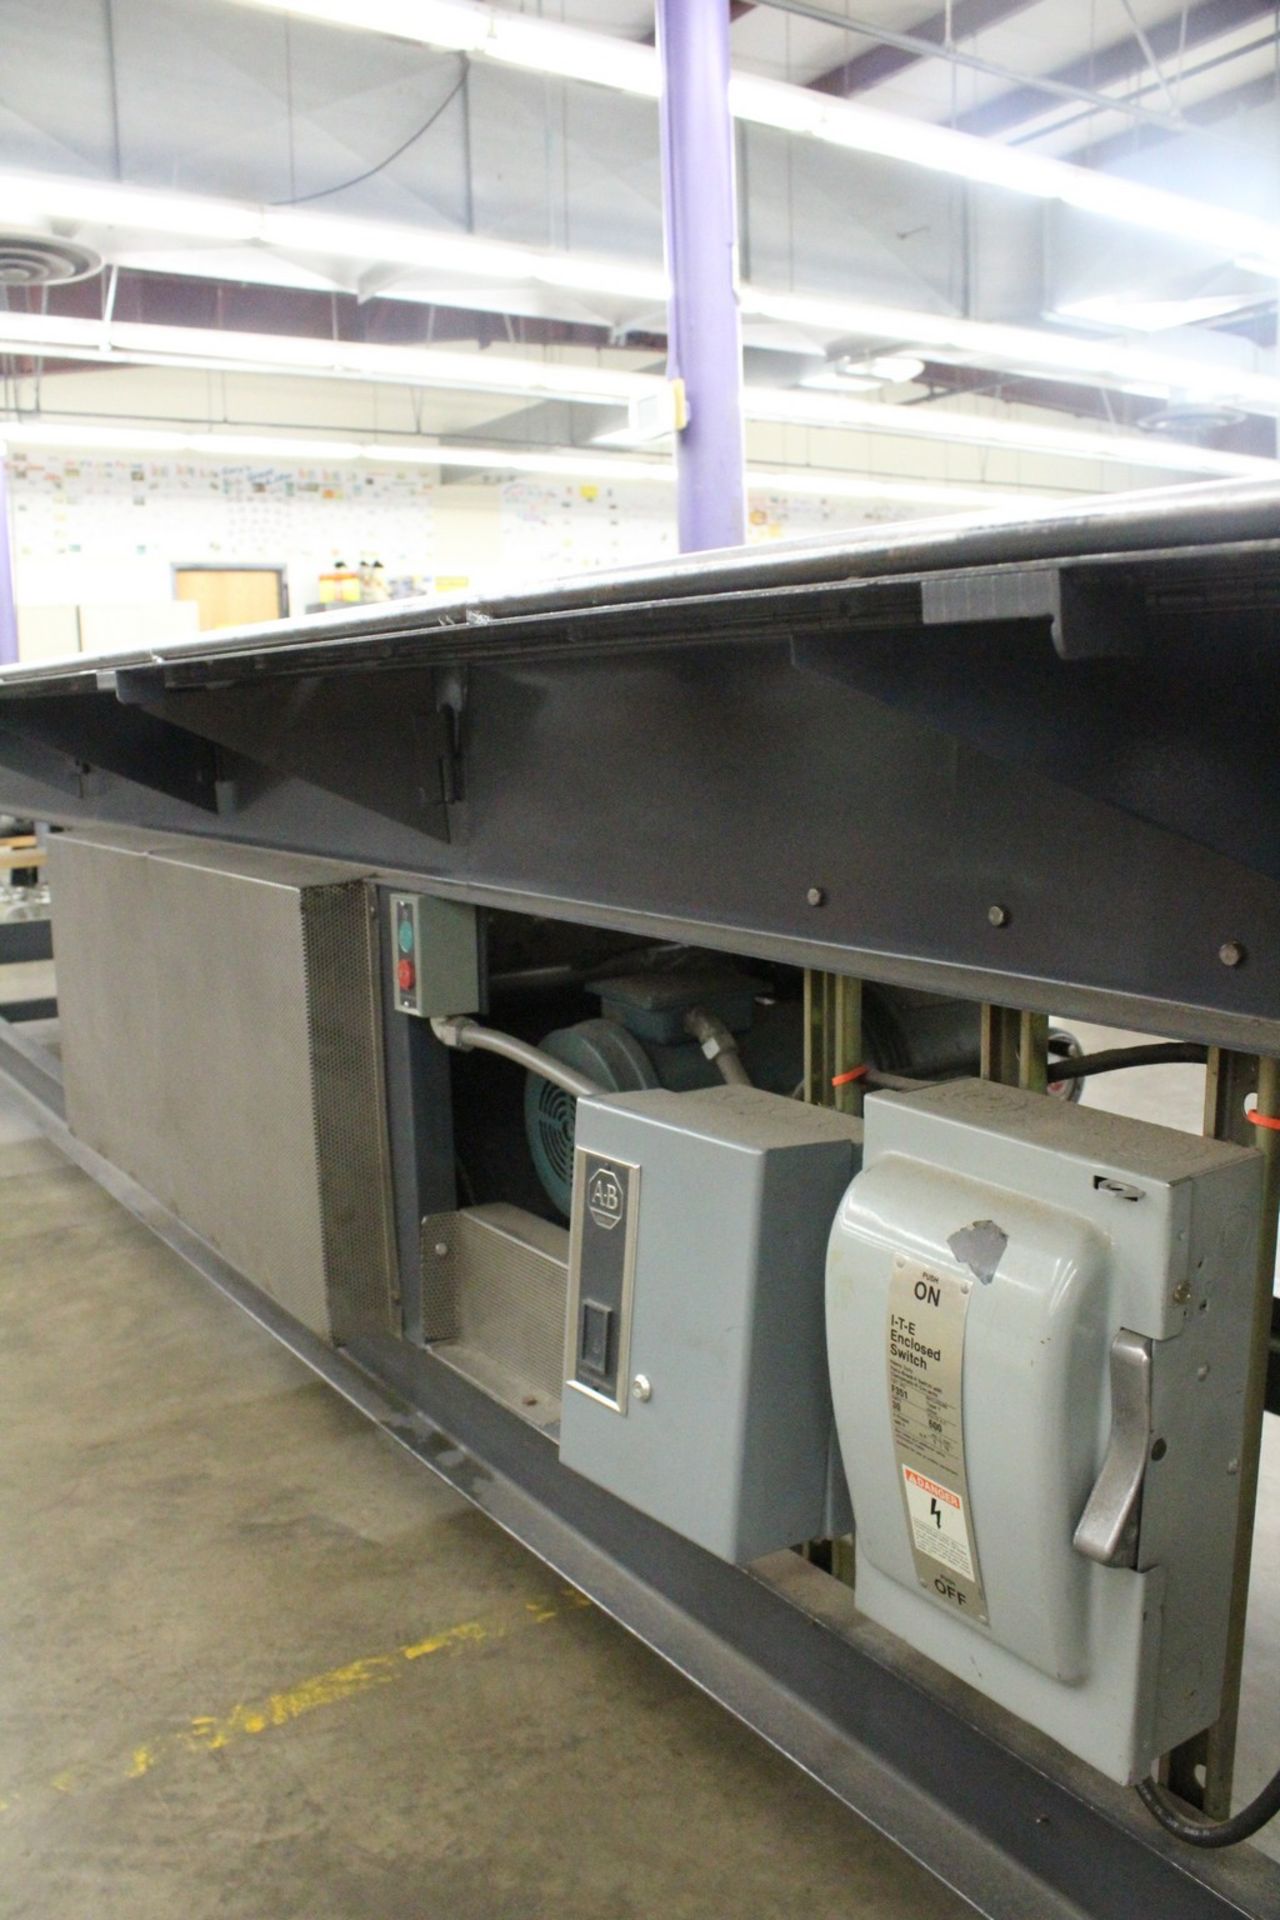 POWERED BELT CONVEYOR, APPROX 23'6" L X 24" W, WITH ALL RELATED MOTORS, STARTERS, SWITCHES, ETC. - Image 3 of 5